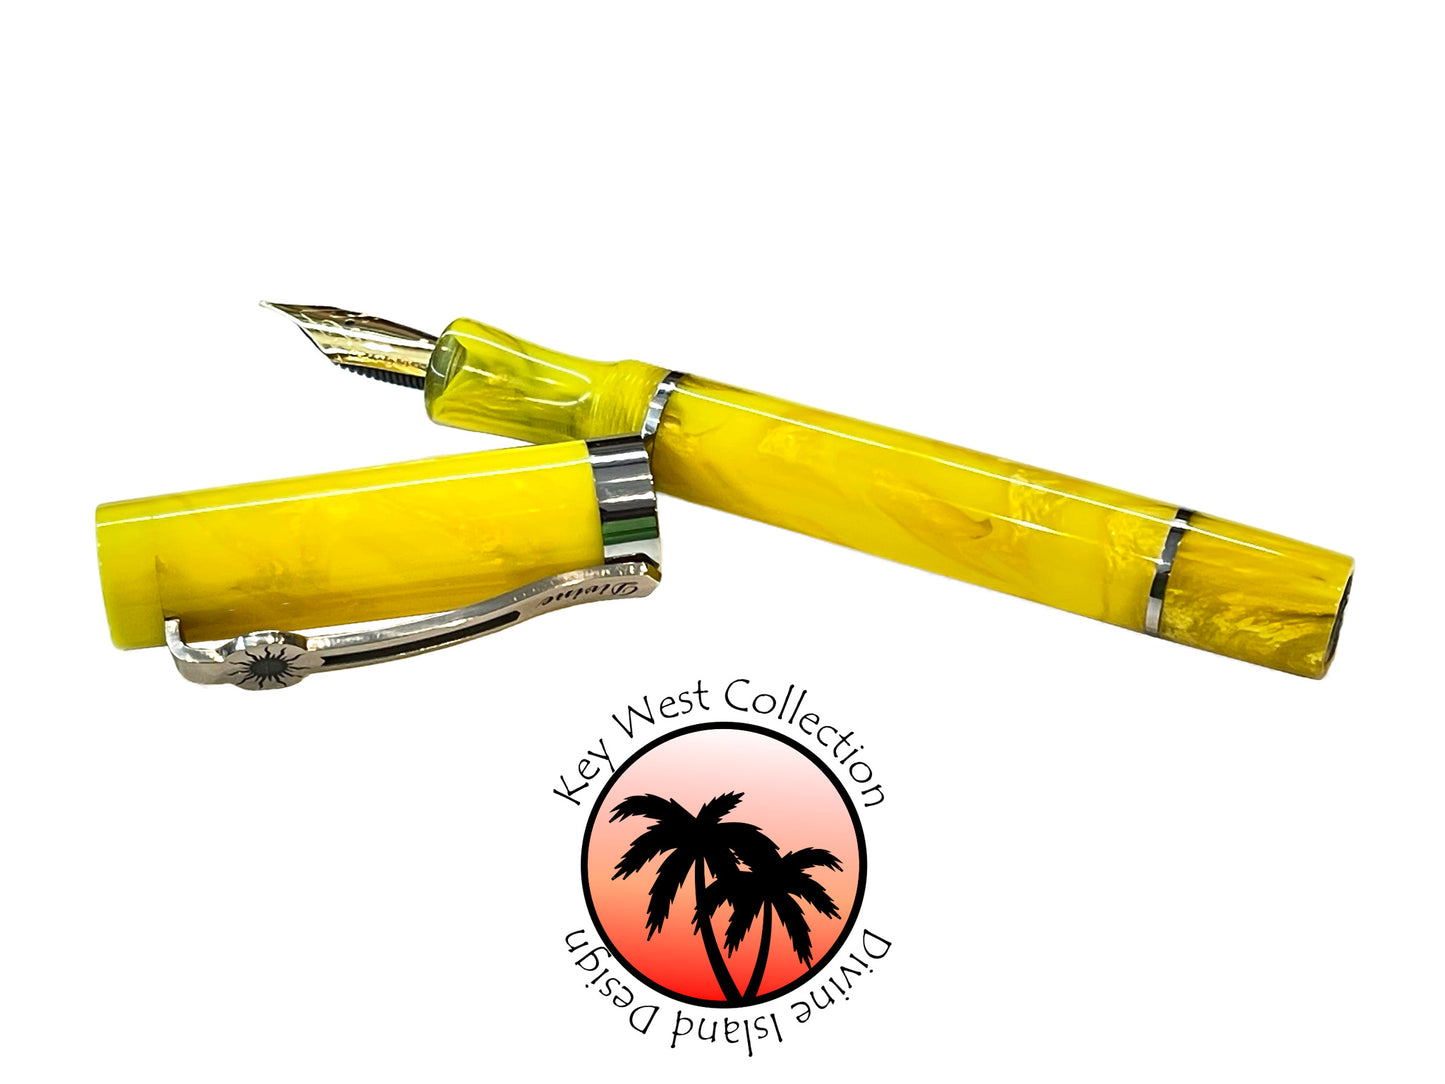 Key West Collection Fountain Pen - "Pineapple"